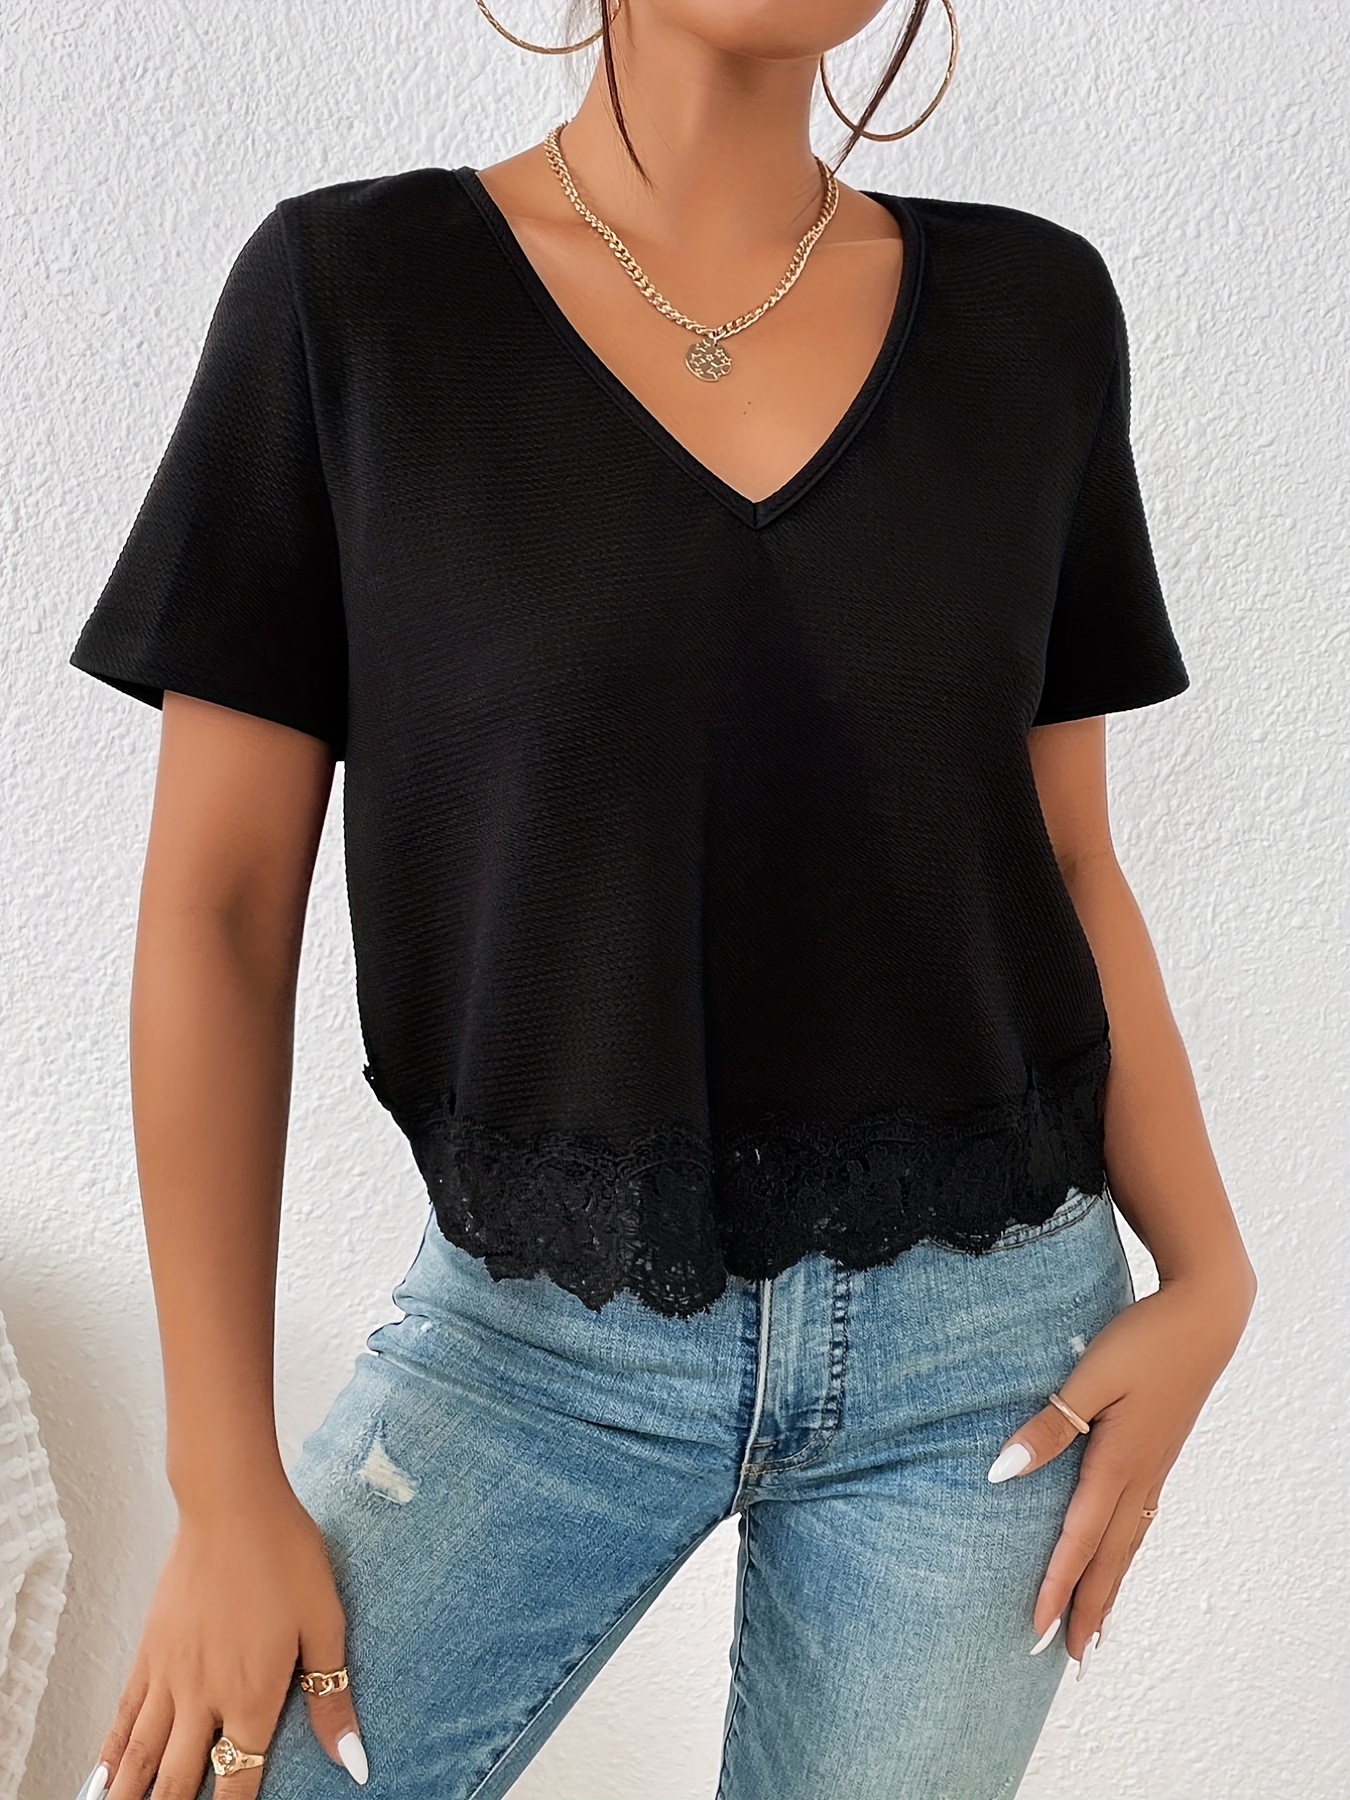 Lace Up Hollow Top, Deep V Neck Short Type Backless Halter Neck Sheer Lace  Up Hollow Blouse for Shopping for Women (M) Black at  Women's  Clothing store